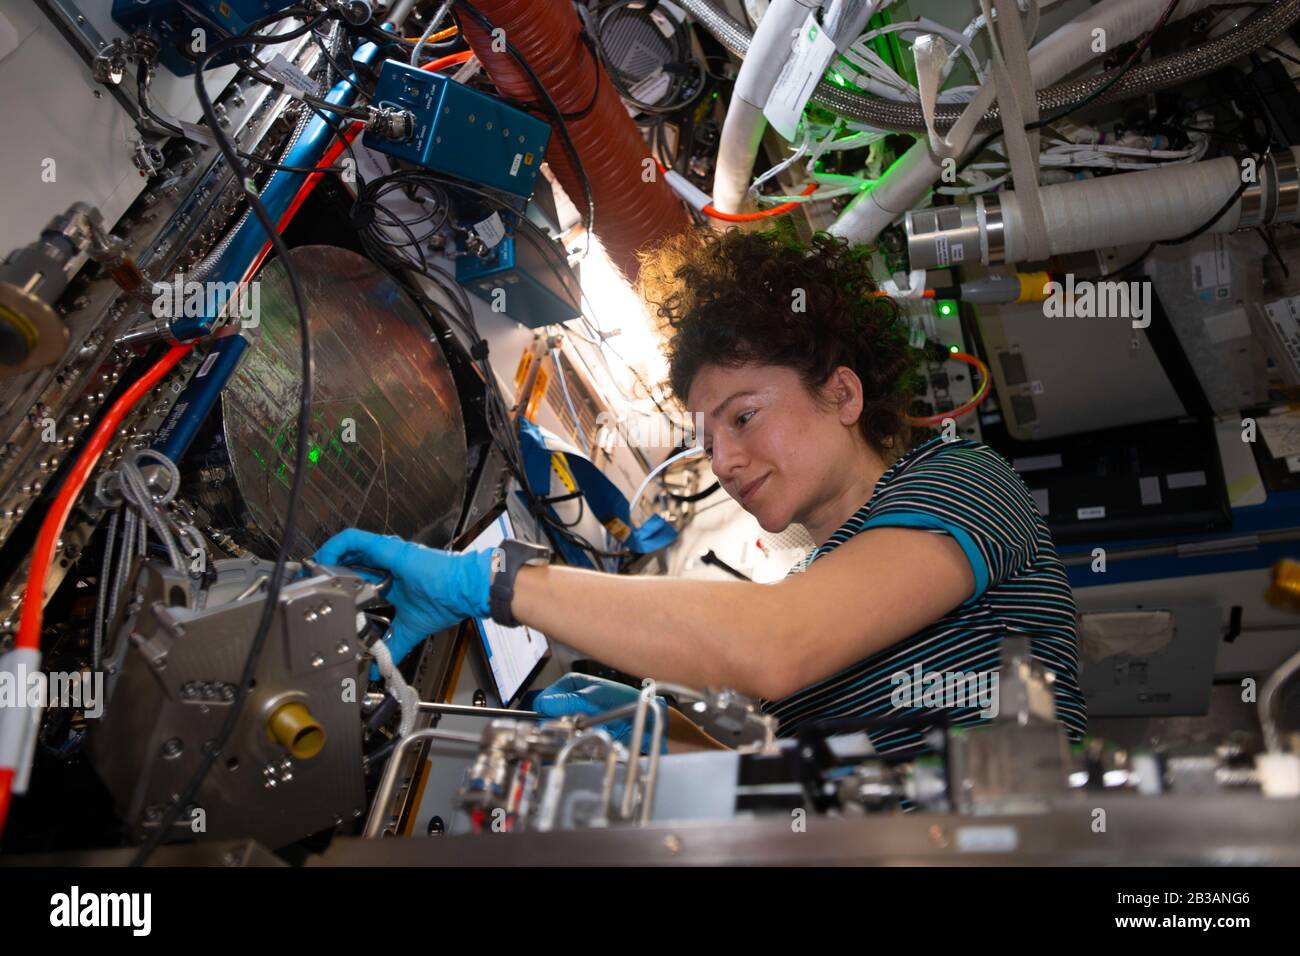 ISS - 15 Feb 2020 - Expedition 62 Flight Engineer and NASA astronaut Jessica Meir works on orbital plumbing tasks inside the Tranquility module's Life Stock Photo